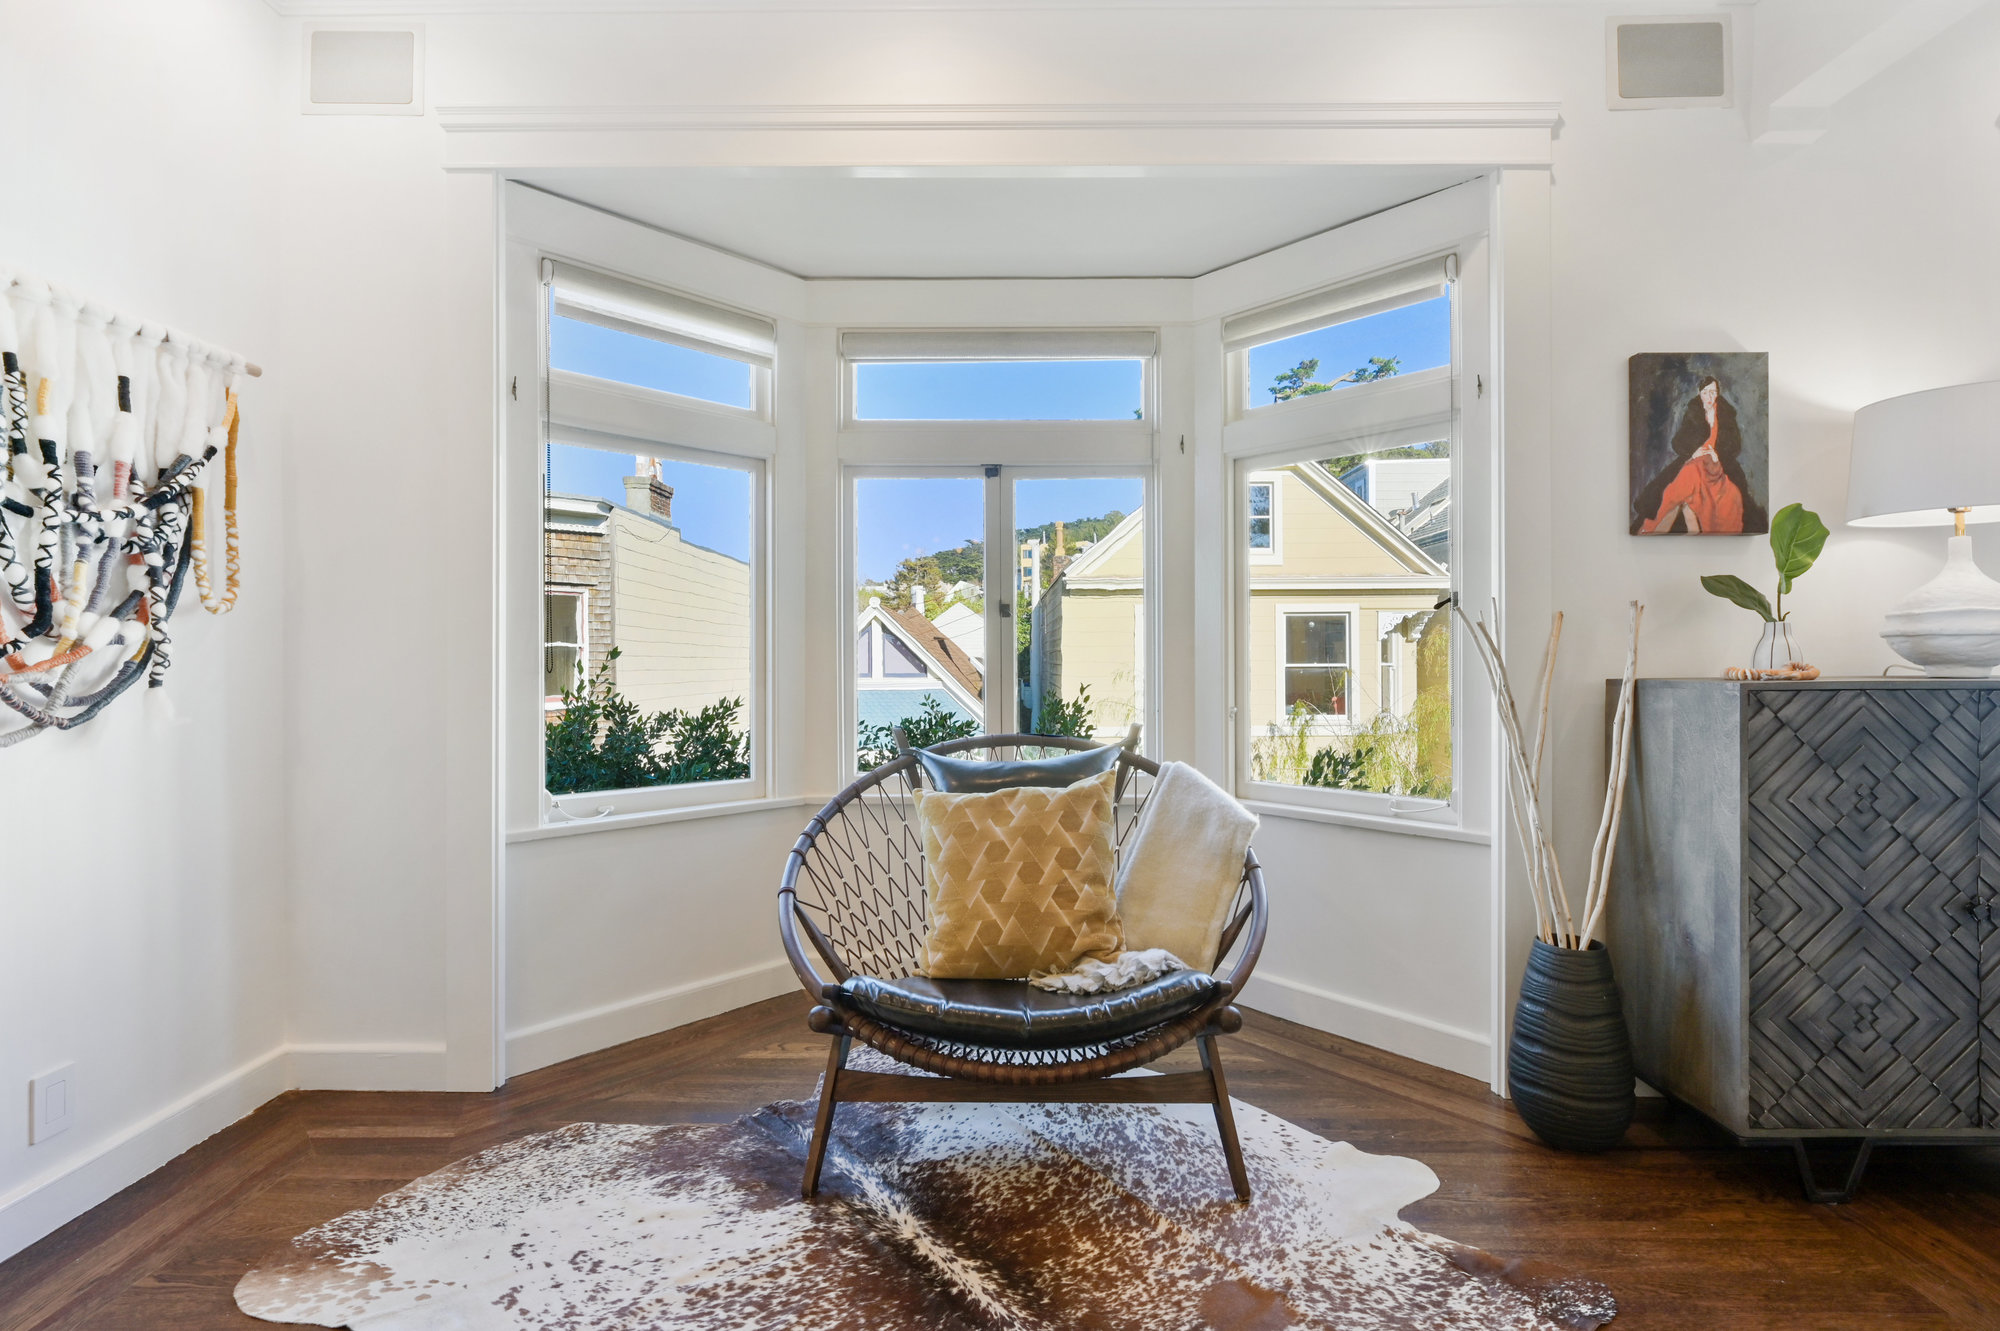 Property Photo: Close-up view of a sitting area near a bay window